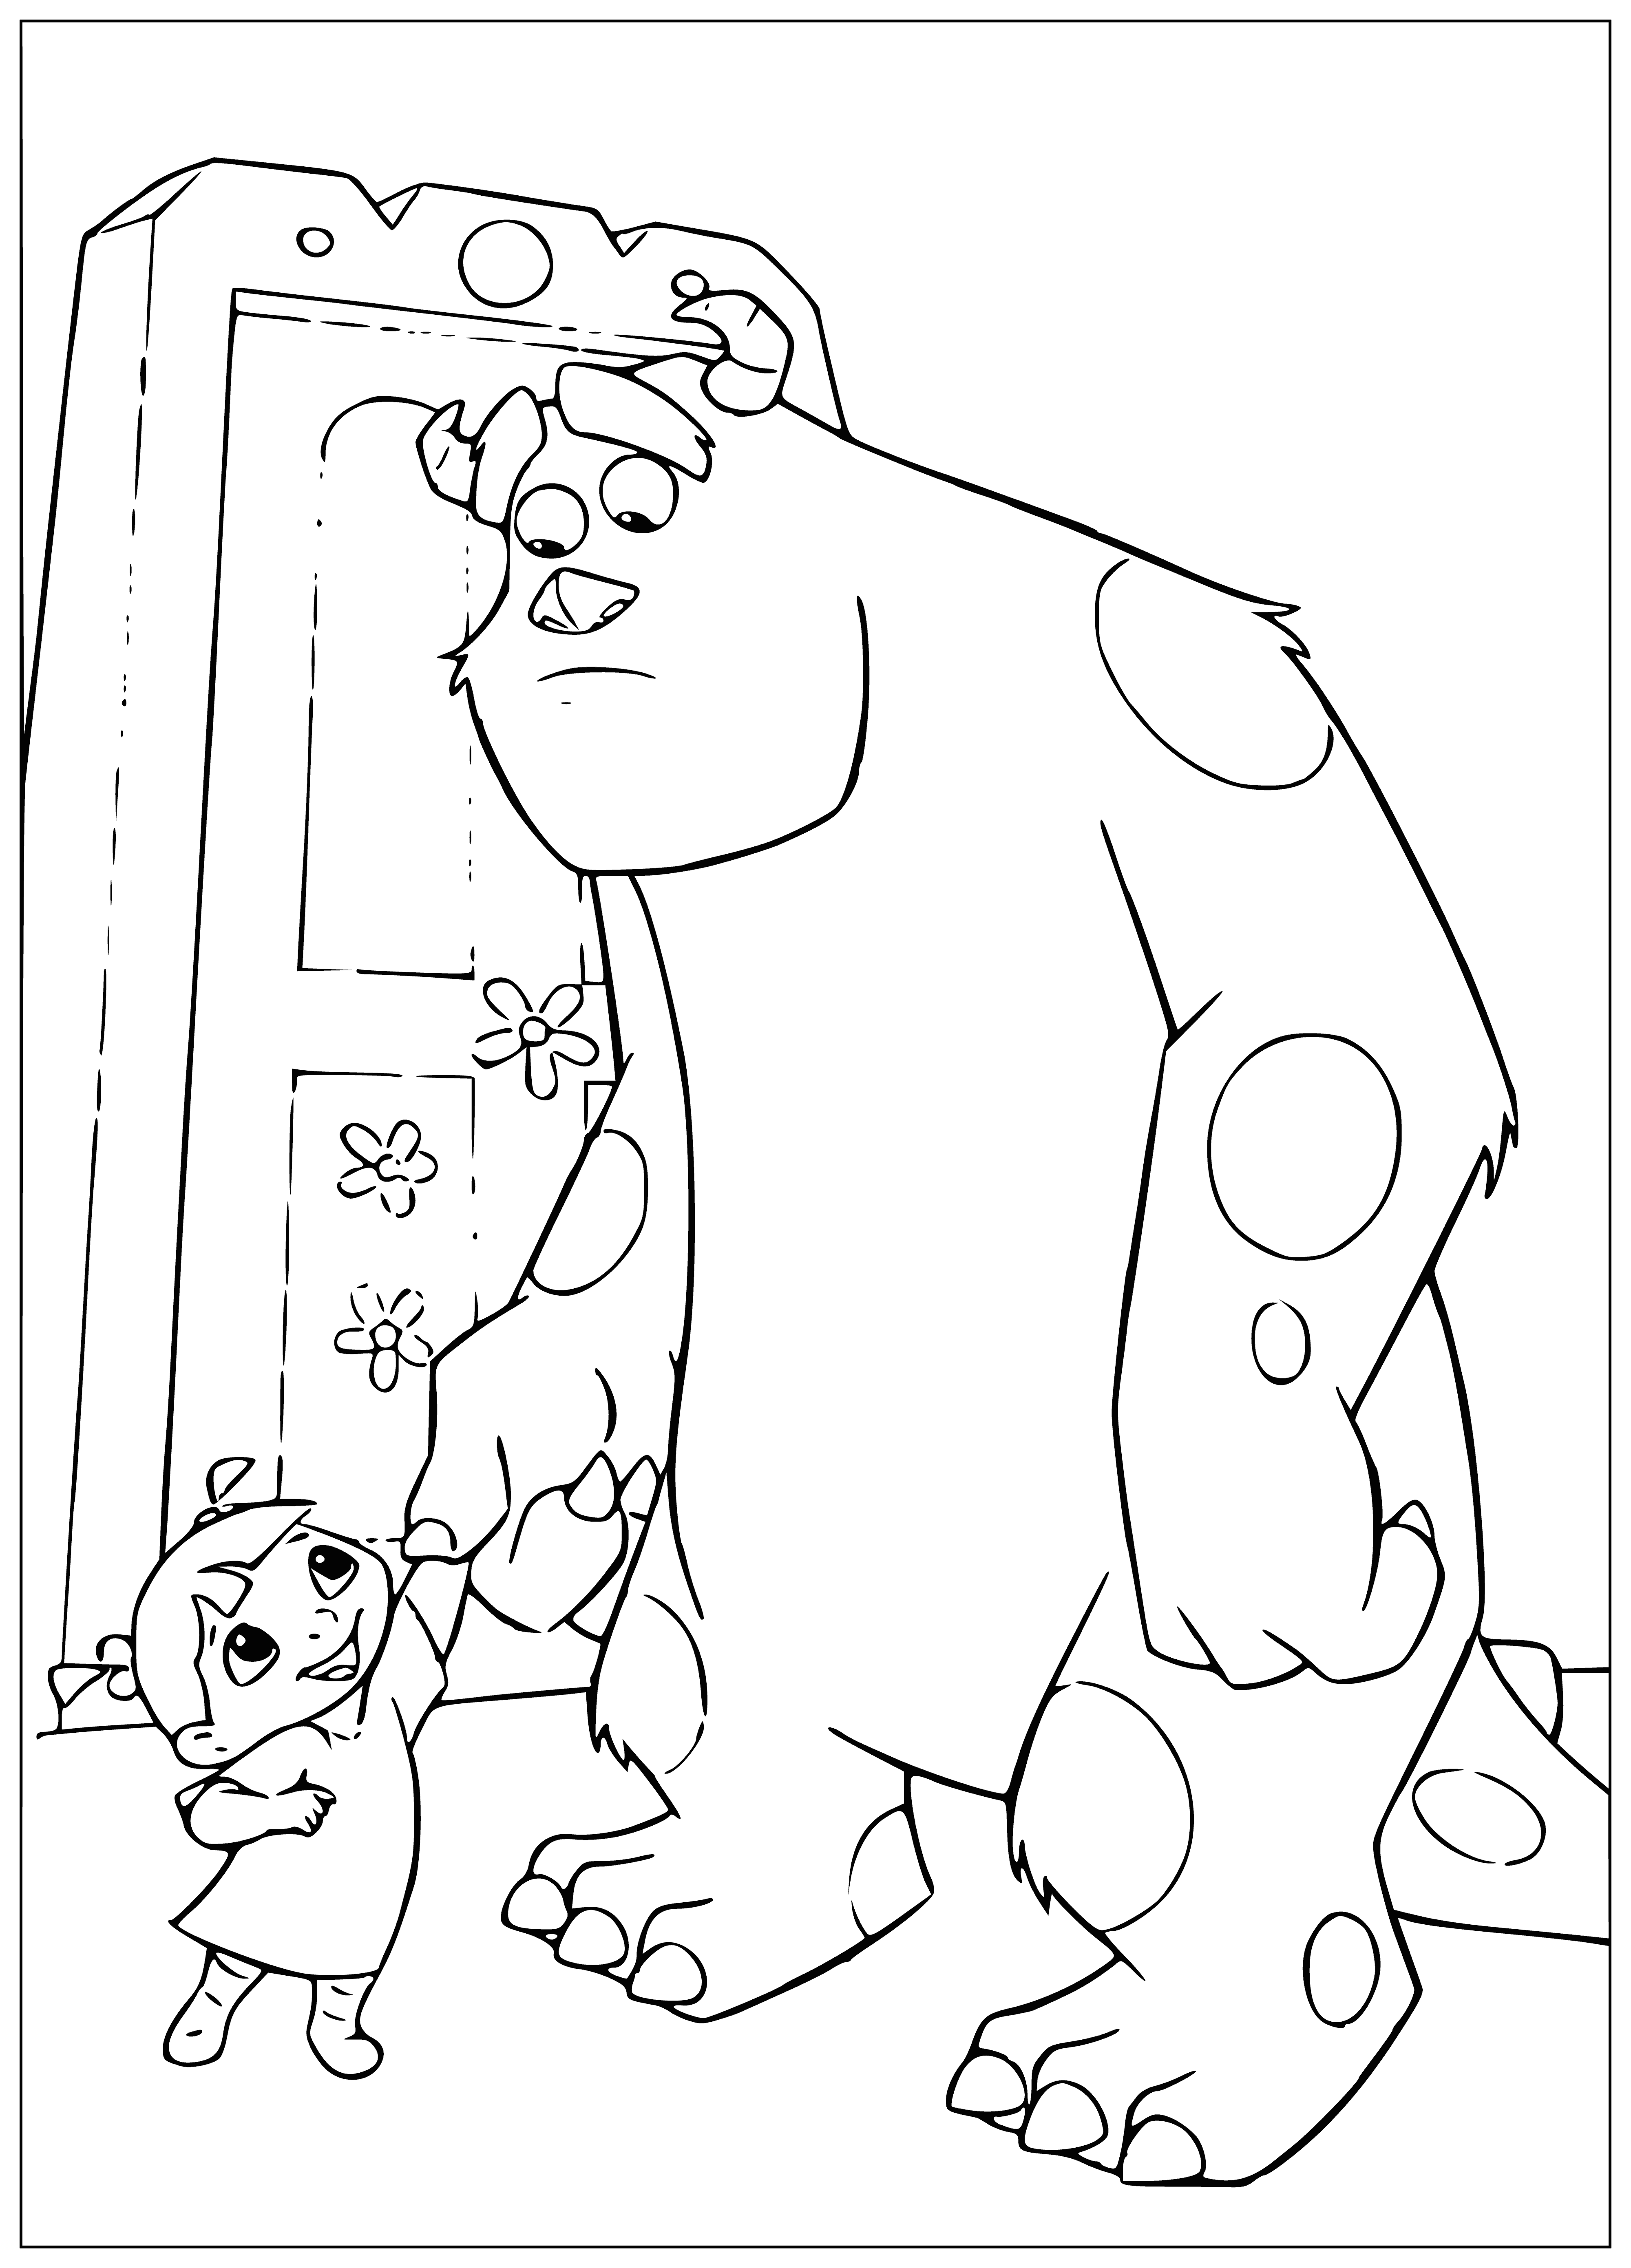 coloring page: Young girl holding hands with a blue monster & Sally, the small brown creature, from "Monsters, Inc." Both characters standing beside her, girl wearing a purple shirt with a white collar. #MonstersInc#cartoon